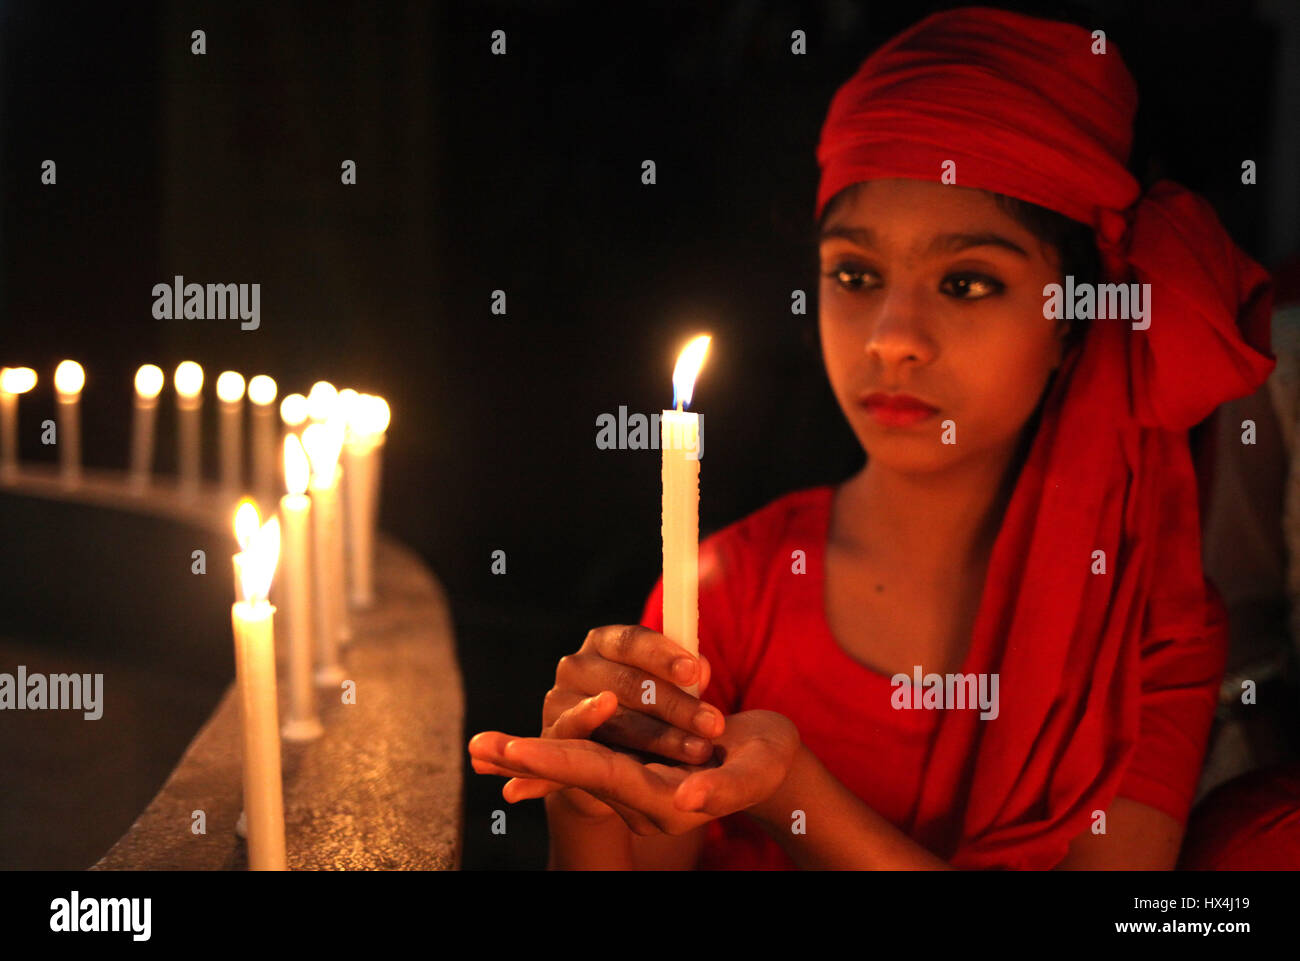 Dhaka, Bangladesh. 25th Mar, 2017. 25 March 2017 Dhaka, Bangladesh - A Bangladeshi childran lit candles to remember the victims of ''Operation Searchlight,'' the 1971 military operation carried out by the Pakistan Army to curb the Bengali nationalist movement in the Dhaka City on 25 March 2017. The black night of March 25, 1971 when the Pakistani occupation forces kicked off one of the worst genocides in history that led to a nine-month war for the independence of Bangladesh in 1971. Credit: ZUMA Press, Inc./Alamy Live News Stock Photo